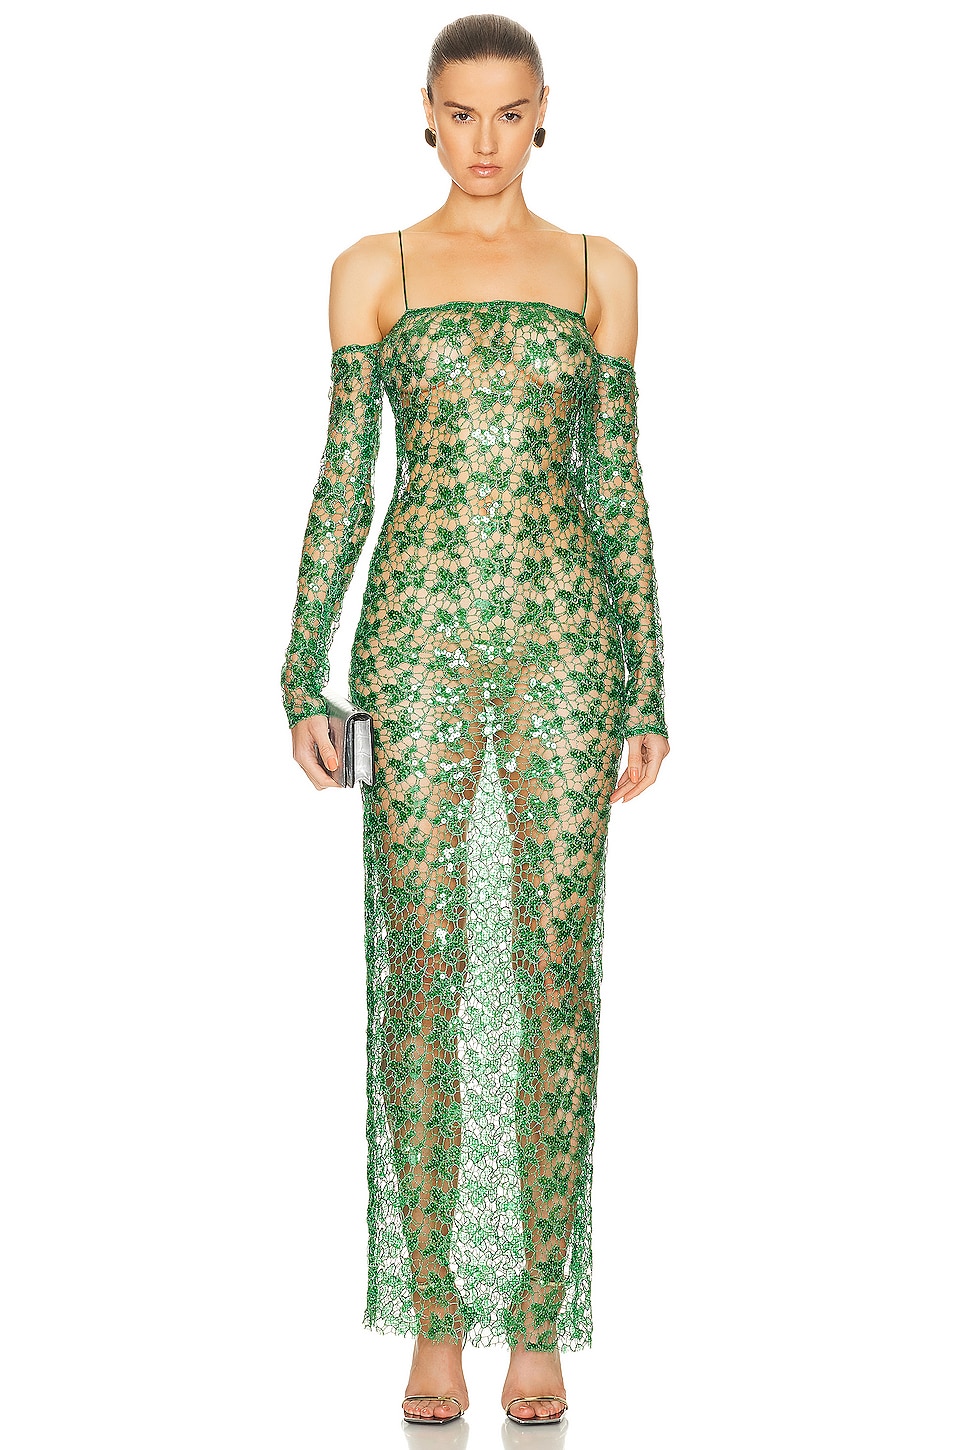 Image 1 of The New Arrivals by Ilkyaz Ozel Moss Dress in Jade Imperial